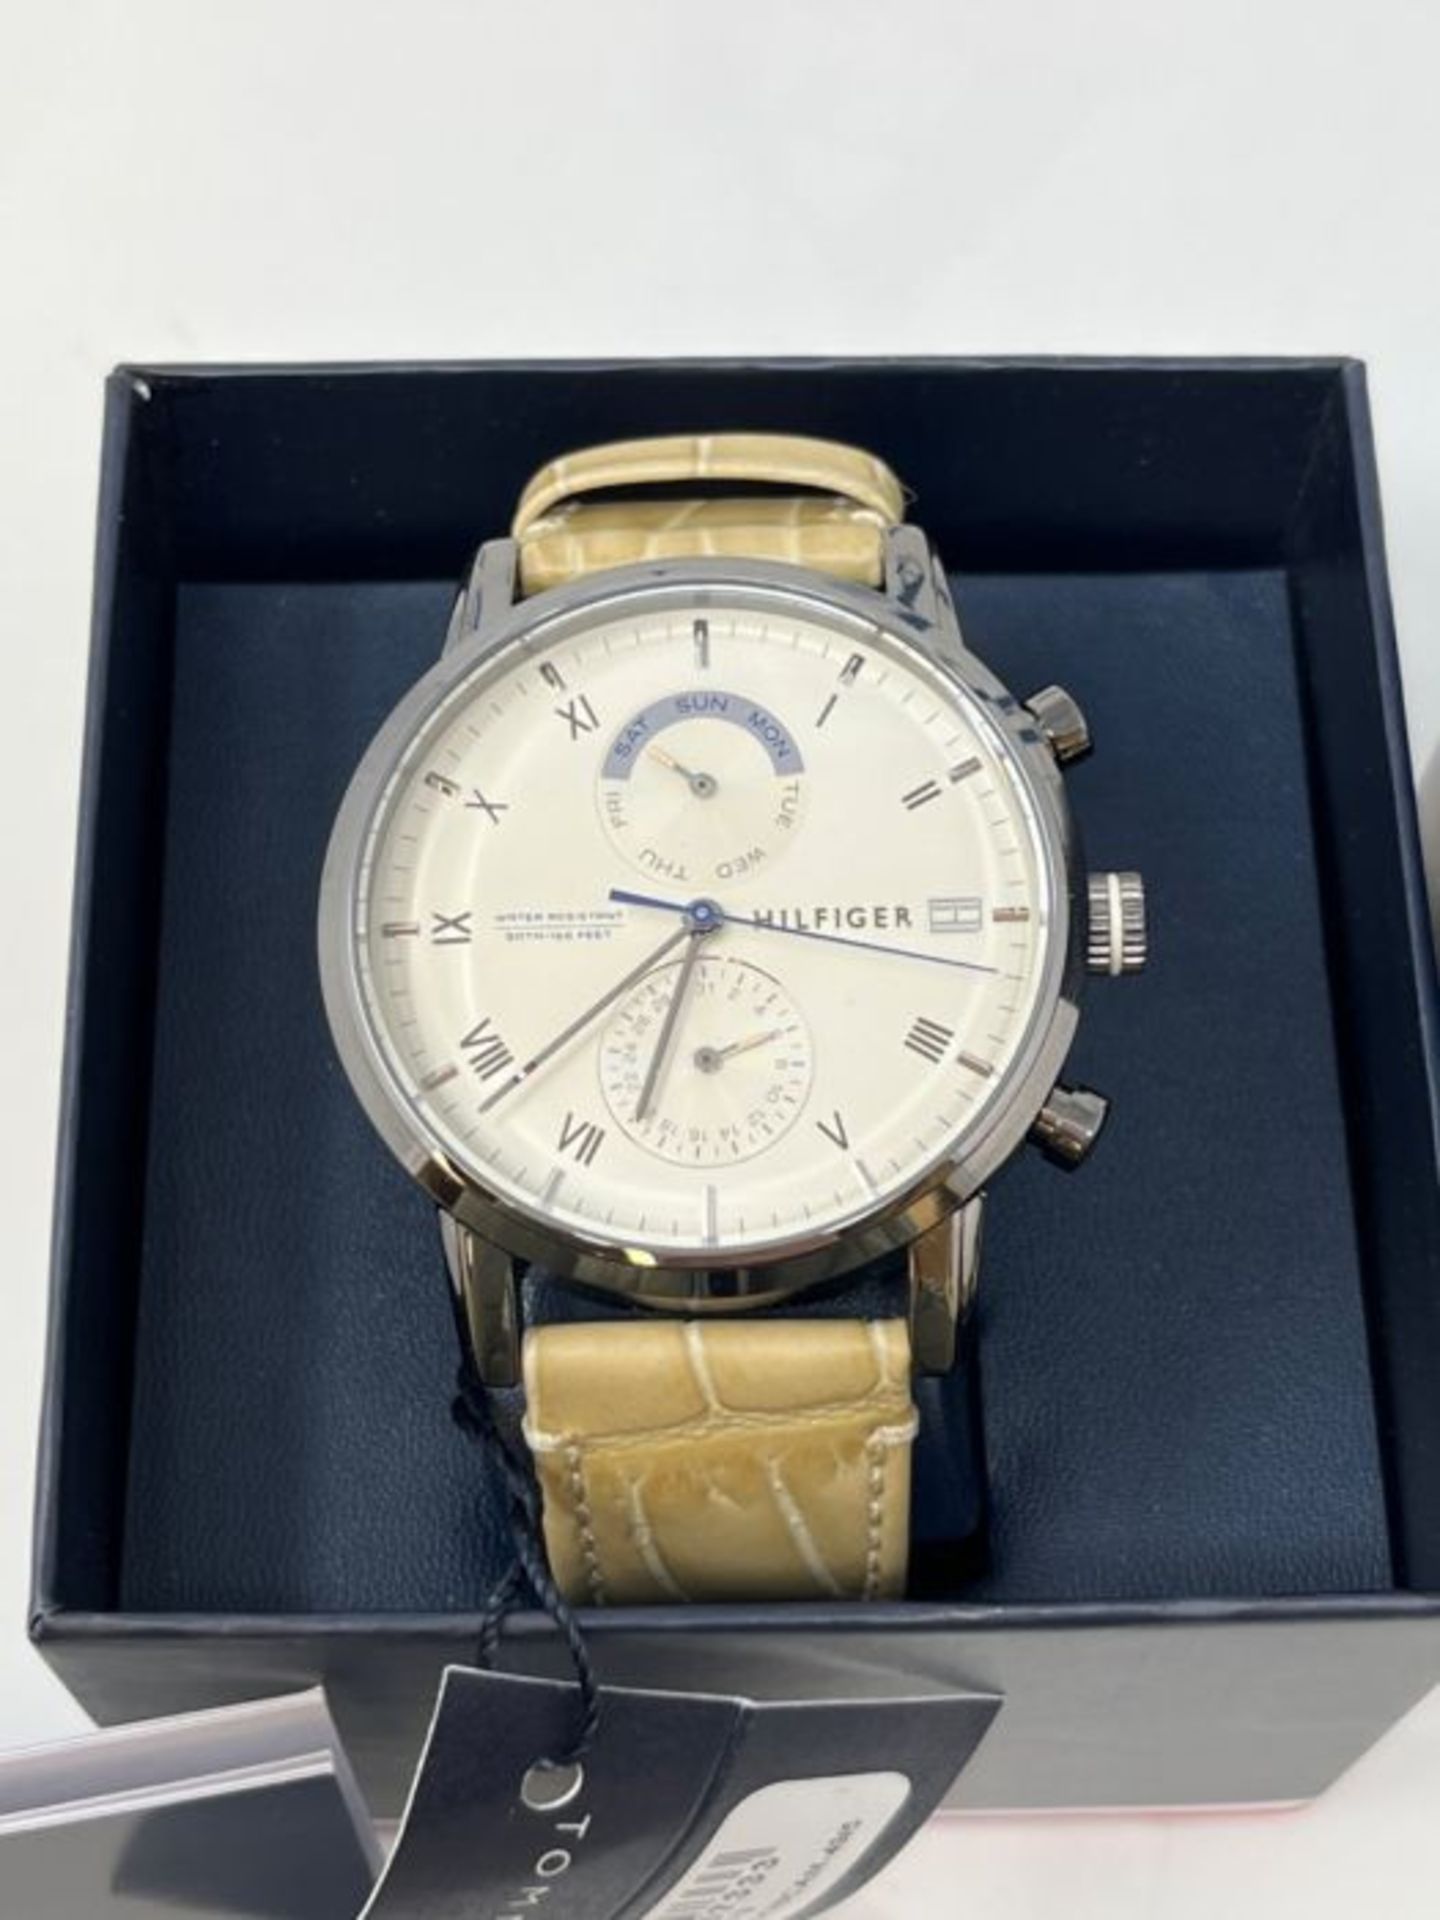 RRP £99.00 Tommy Hilfiger Men's Analogue Quartz Watch with Leather Strap 1710399 - Image 3 of 3